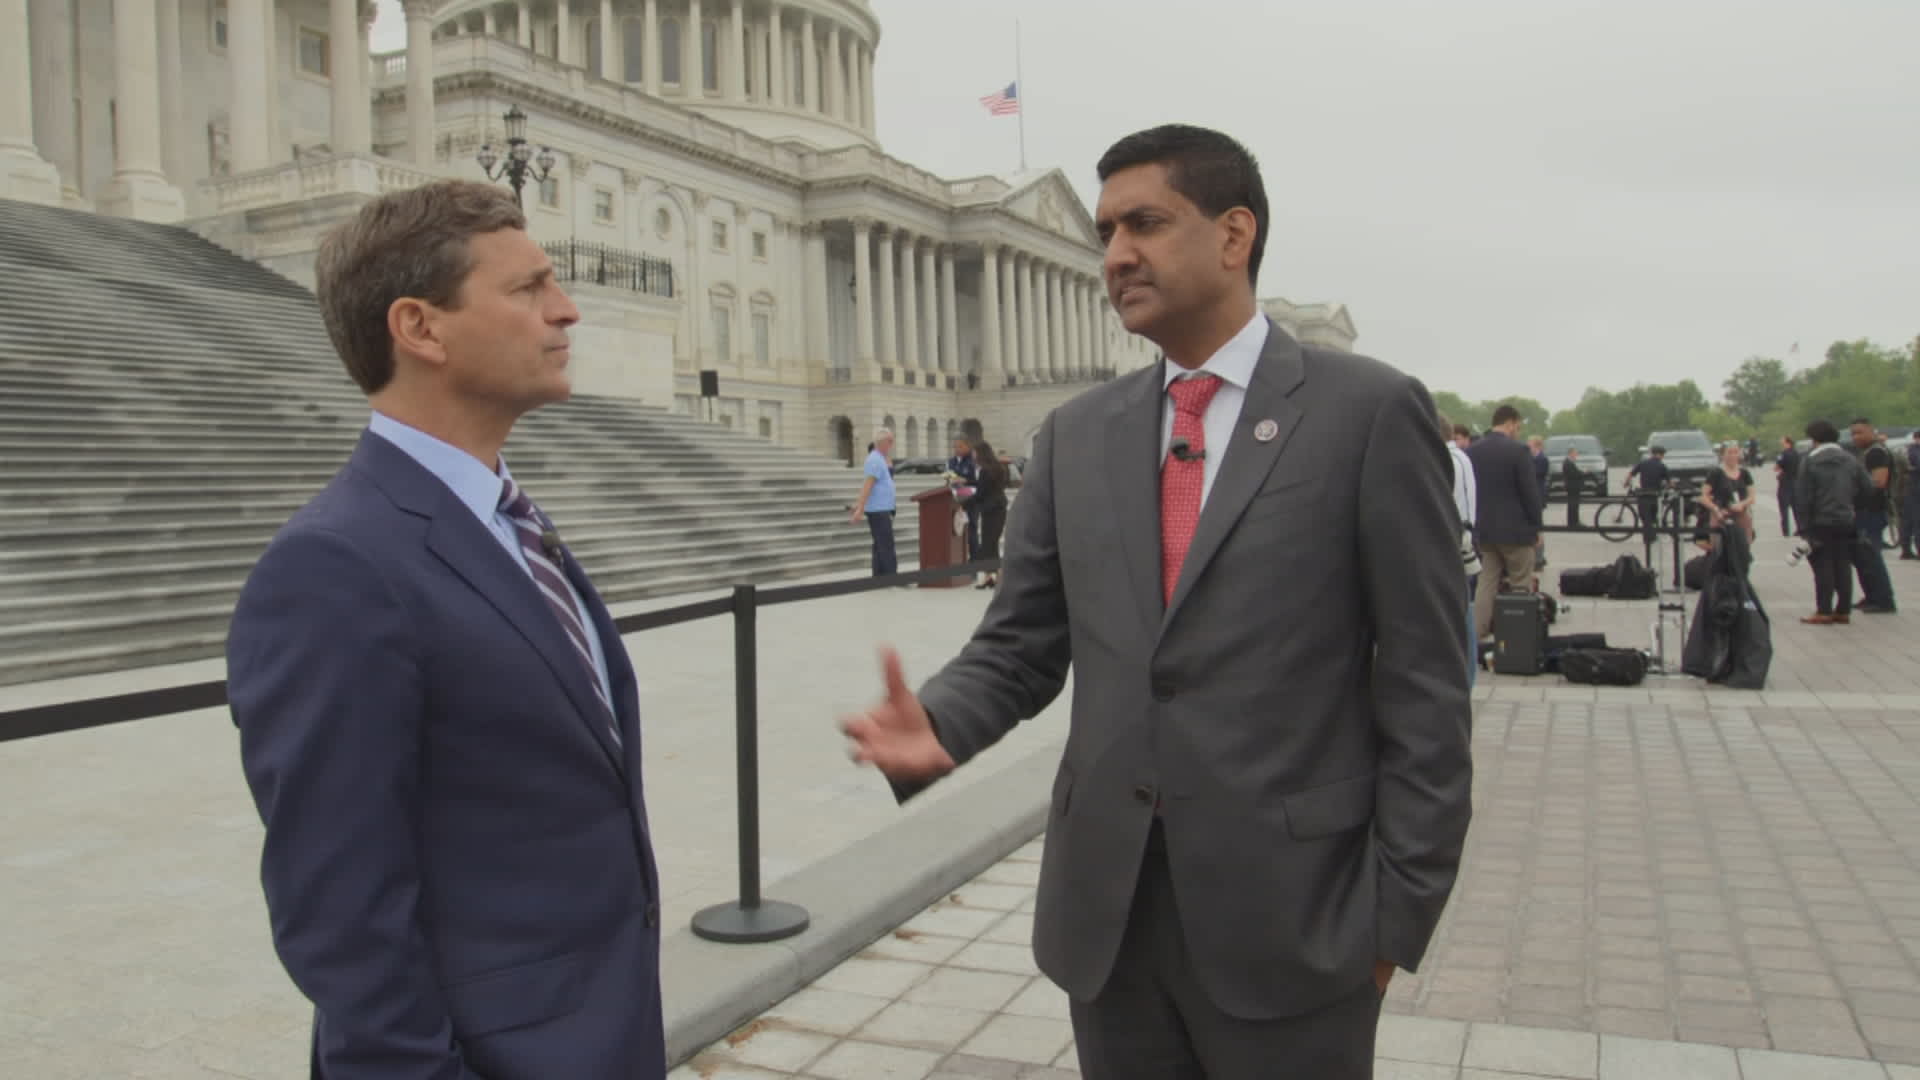 David Faber interviews Rep. Ro Khanna, D-Calif., about his committee's investigation into what Big Oil knew about climate change and when.